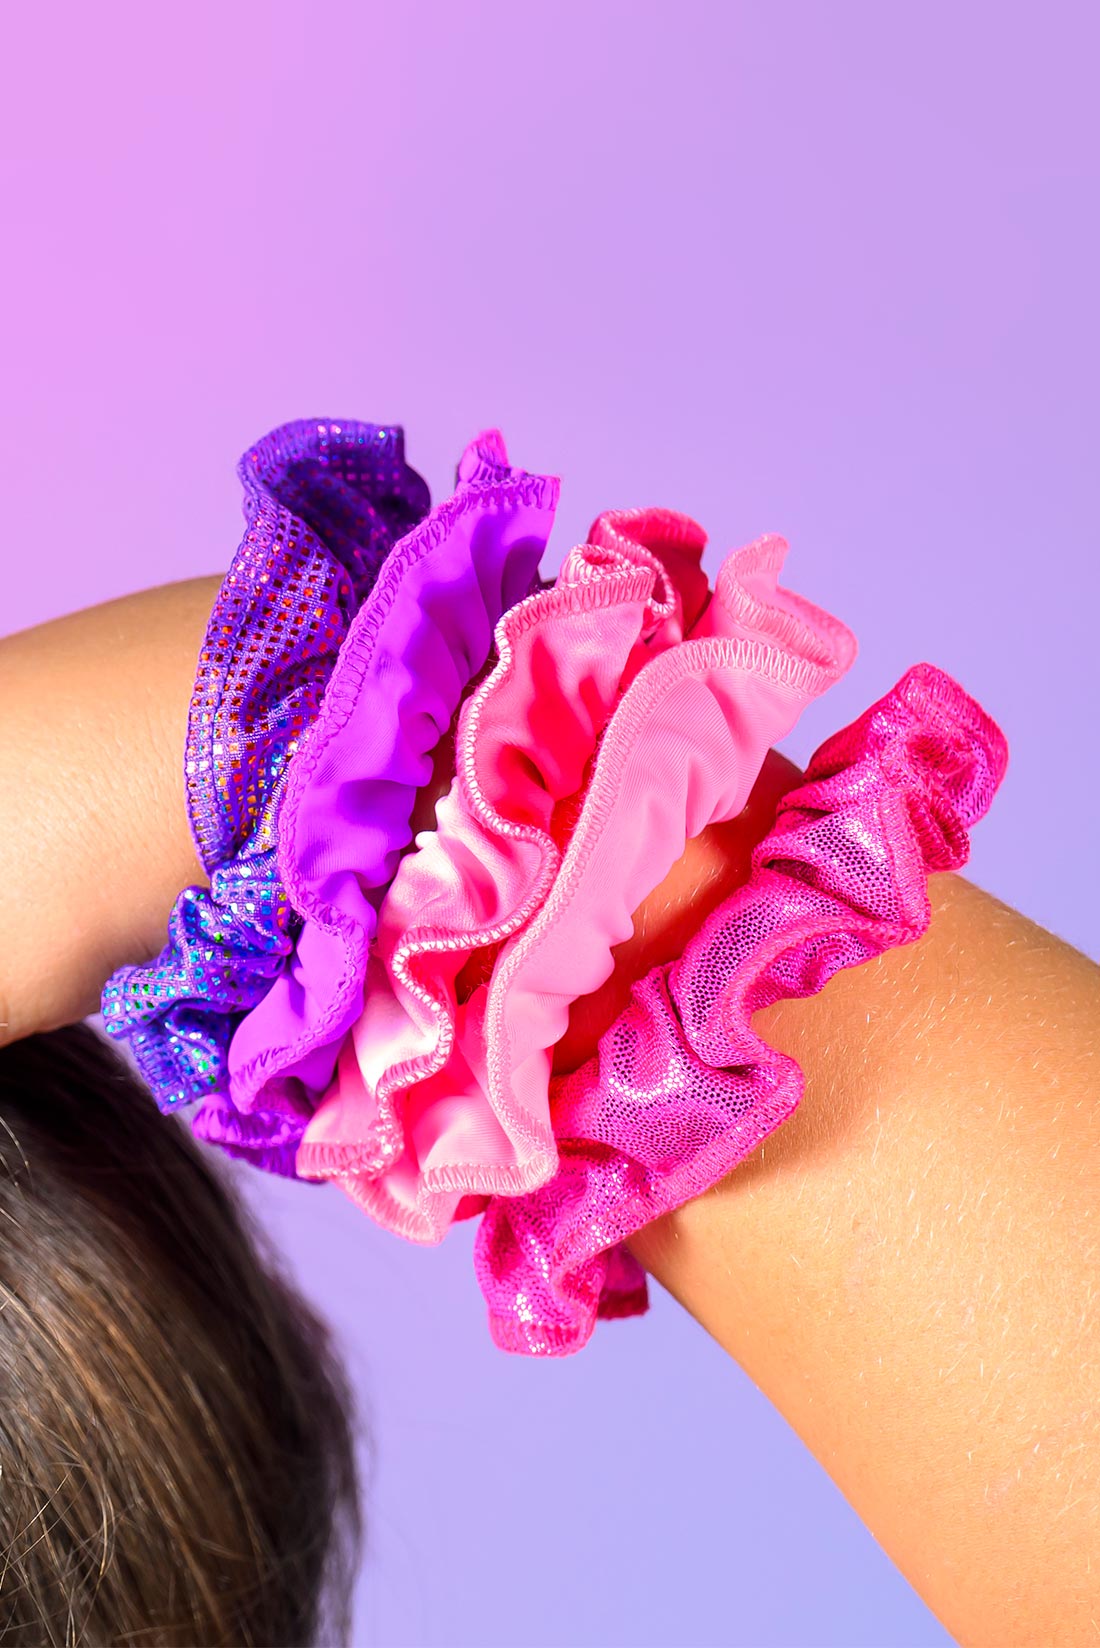 Colorful pink and purple hair ties for gymnasts, Destira, 2023